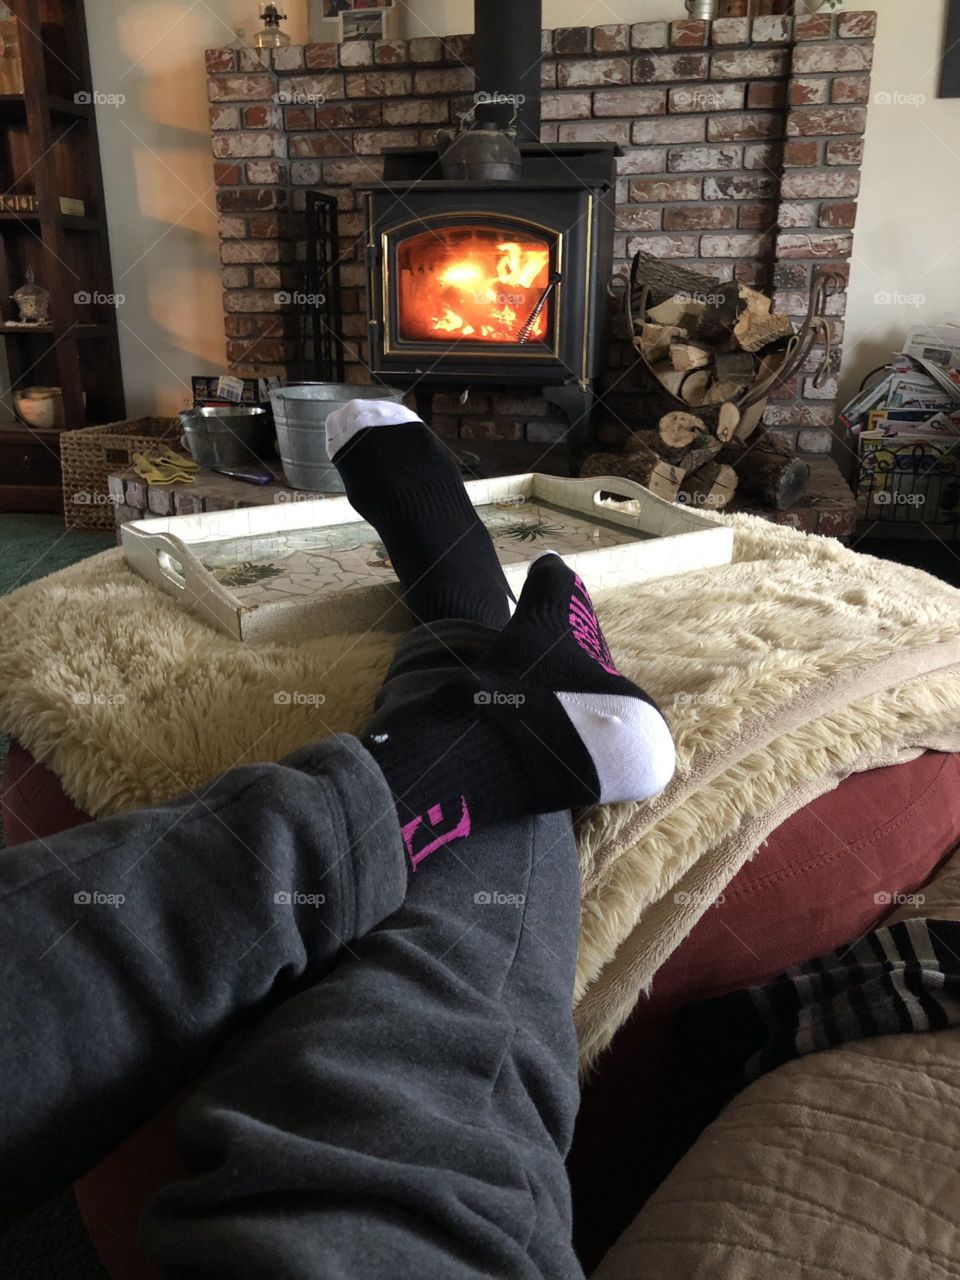 Kick back & relax with T-Mobile! 
advertising advertisement photo commercial T-Mobile #tmoble TMOBILE stocks fireplace warm feet winter time cozy wood burning stove